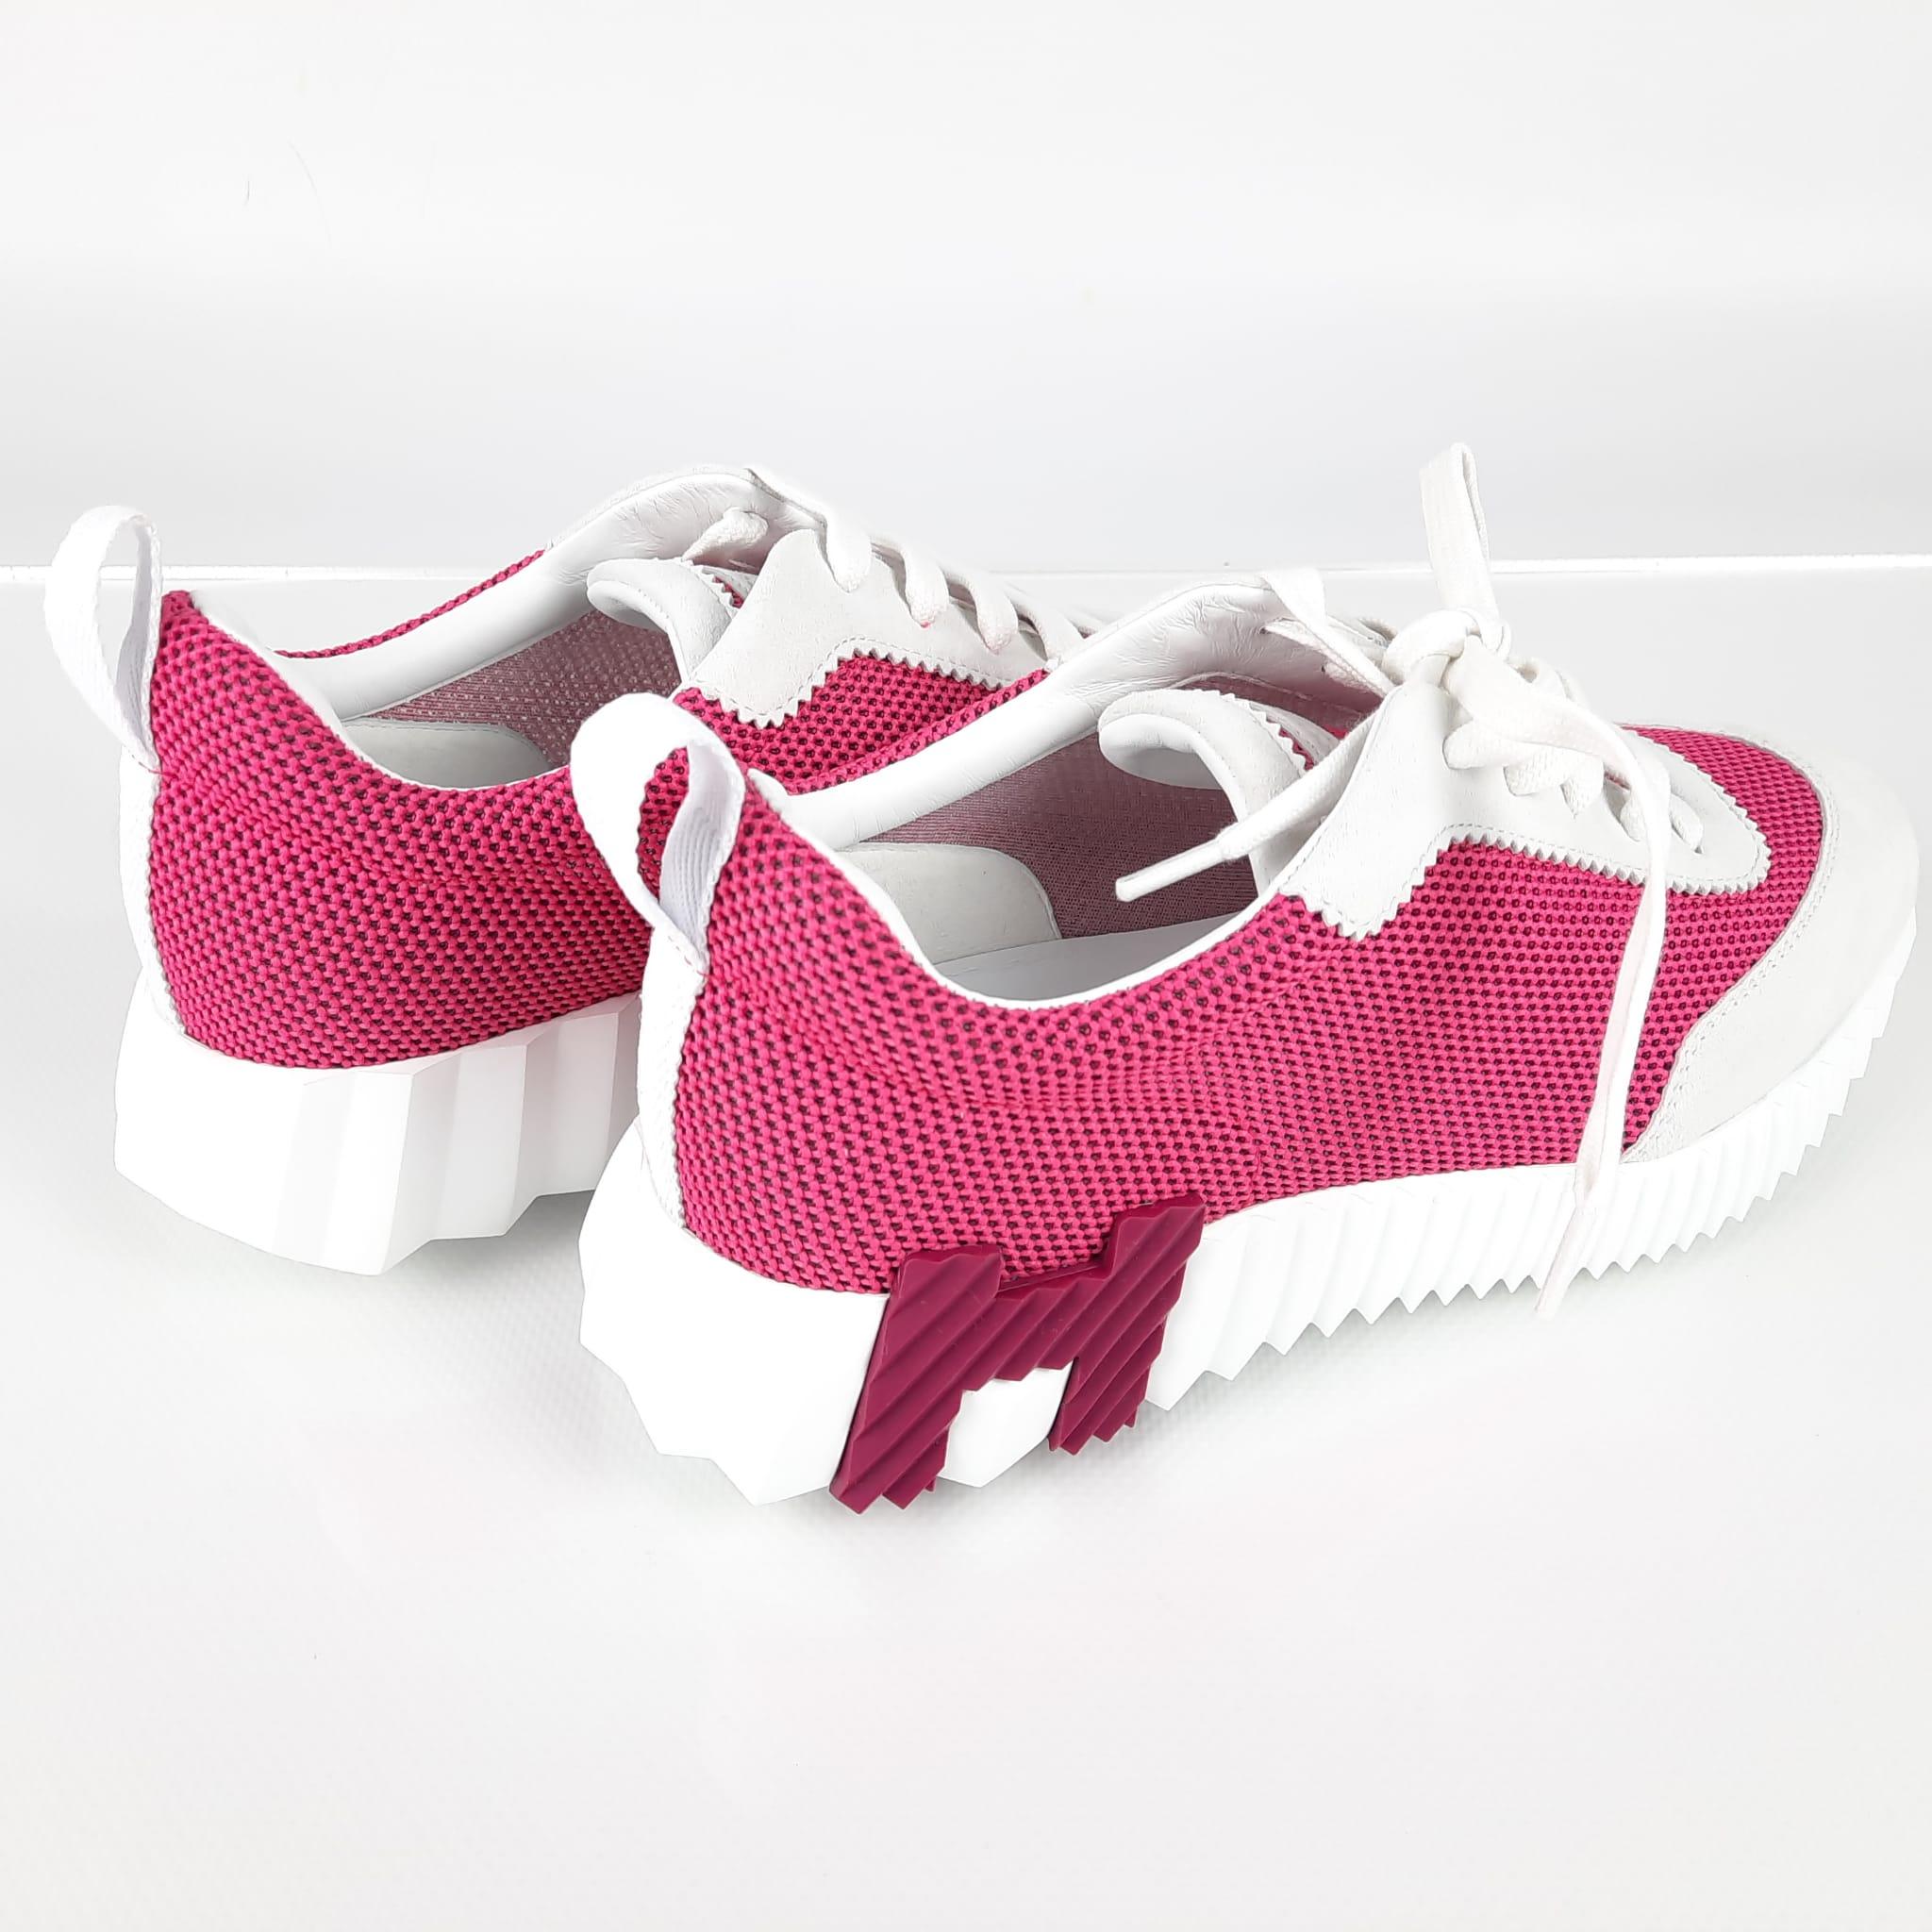 Hermes Bouncing Sneakers Color Vinicunca Pink / White Size 39  1